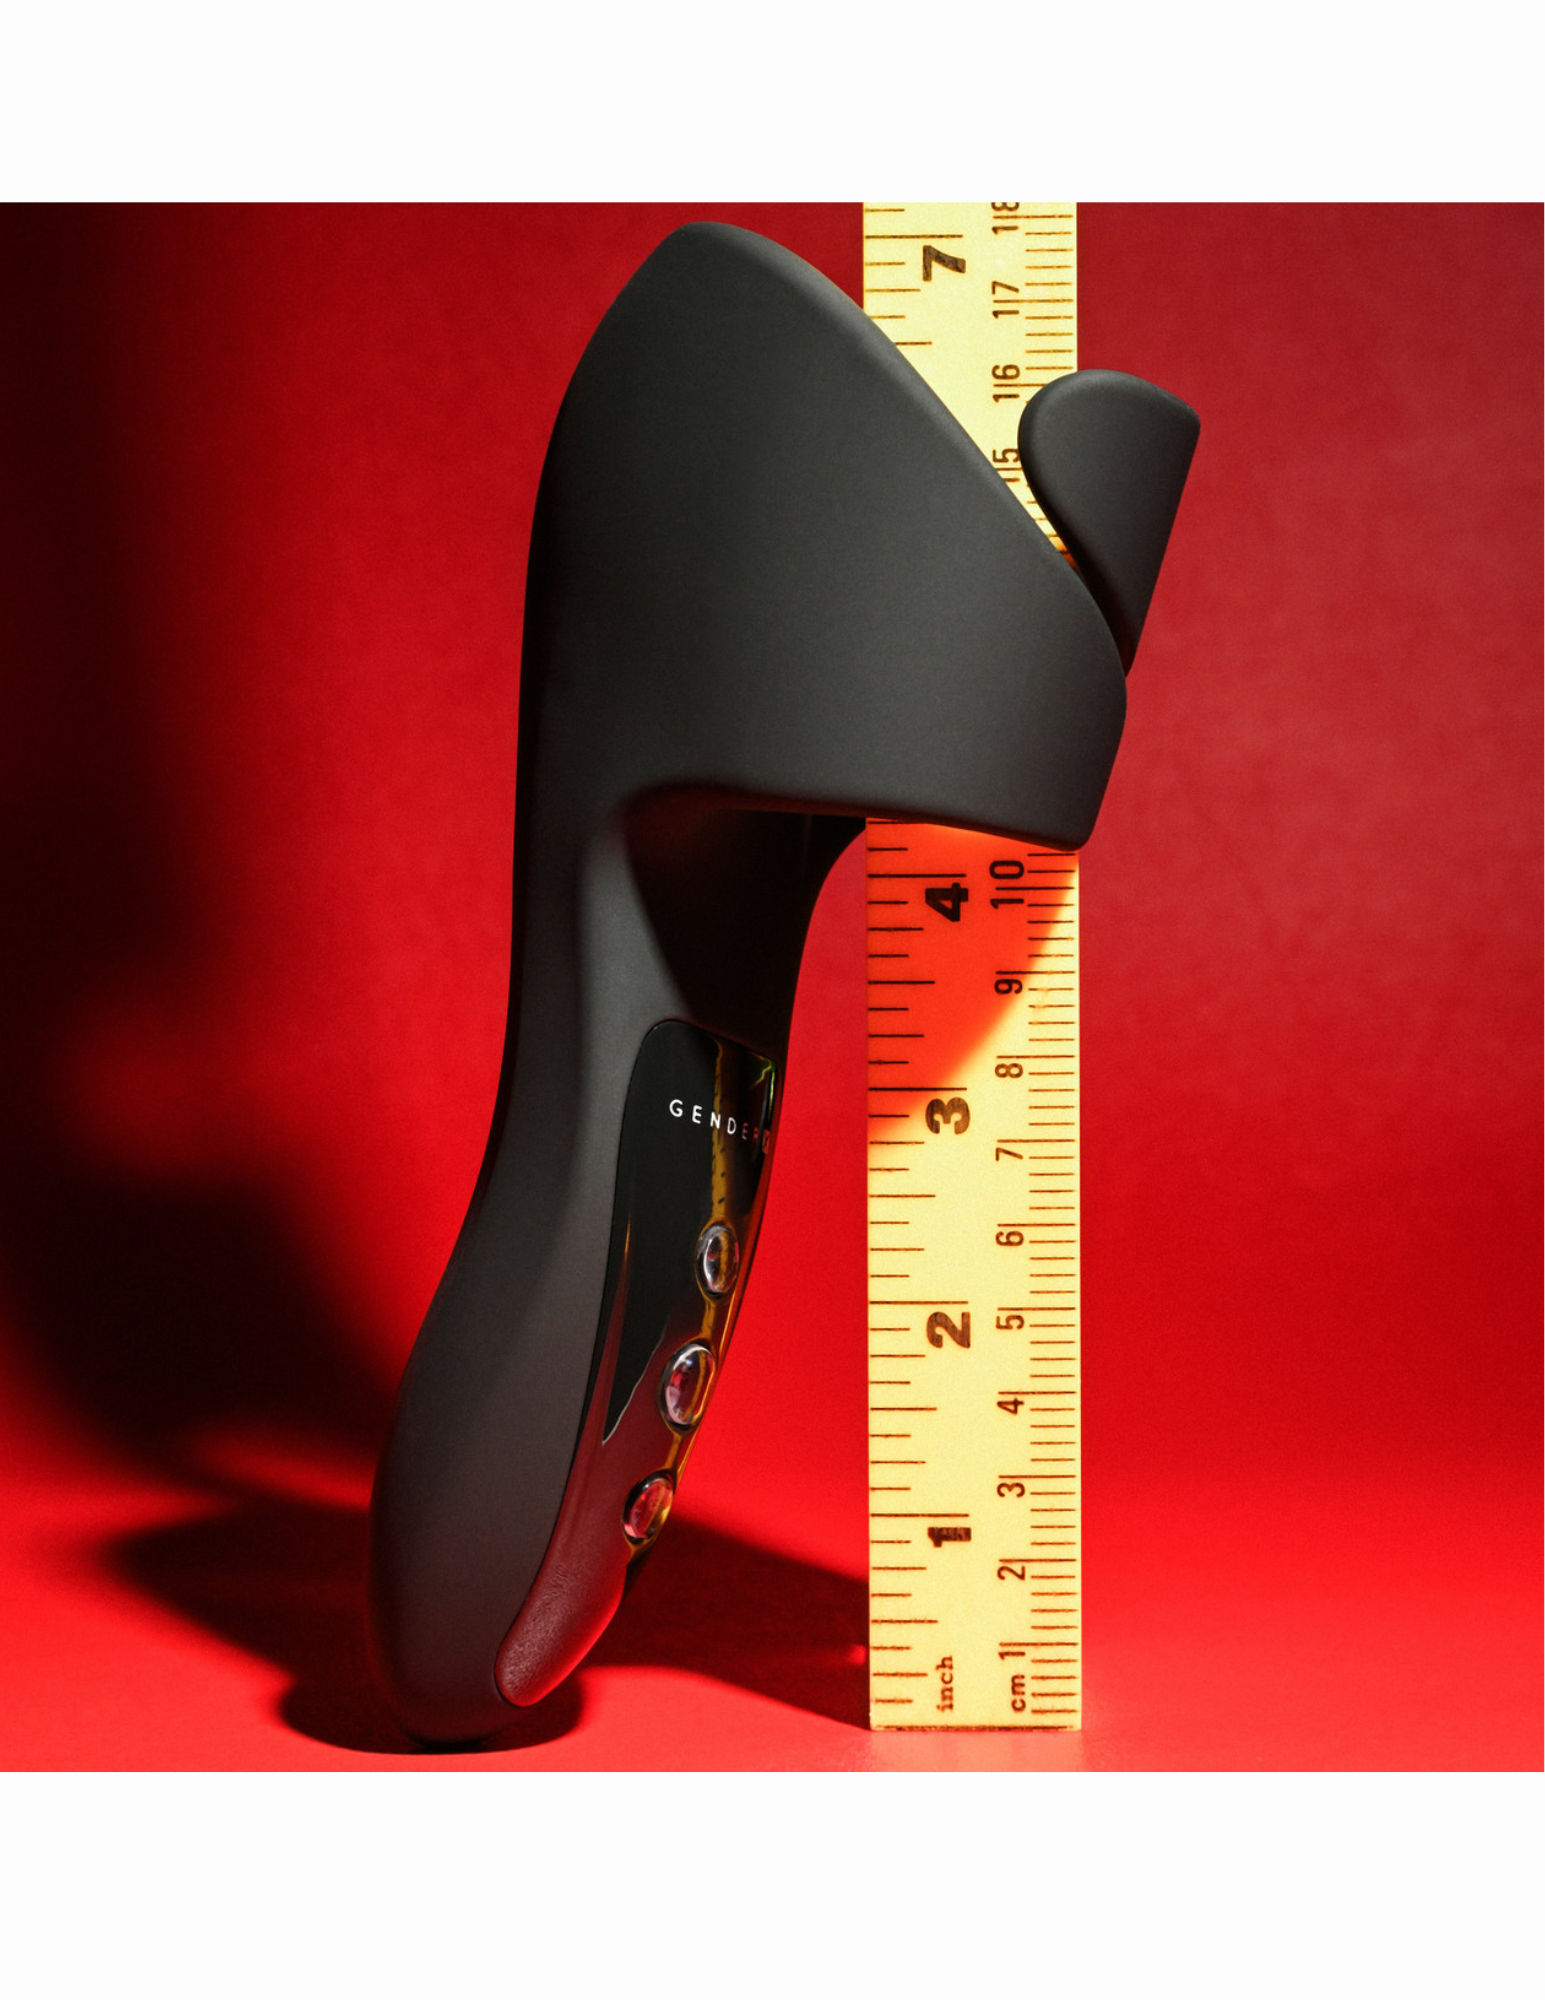 Front view of the Evolved Gender X Embrace Vibrating Stroker shows its size with ruler.